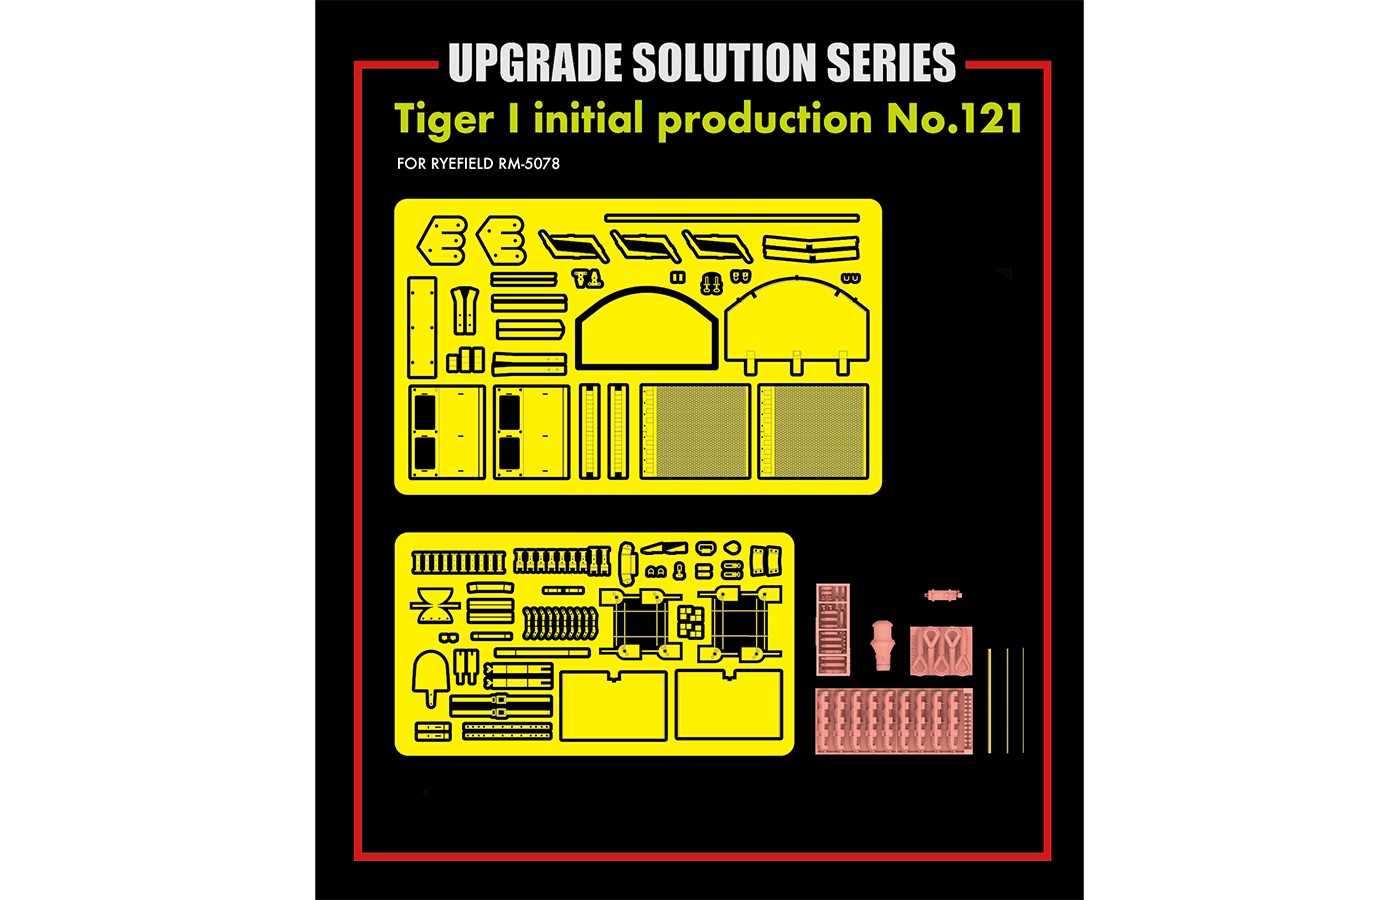 Tiger I 121# Initial Production Upgrade Solution Series